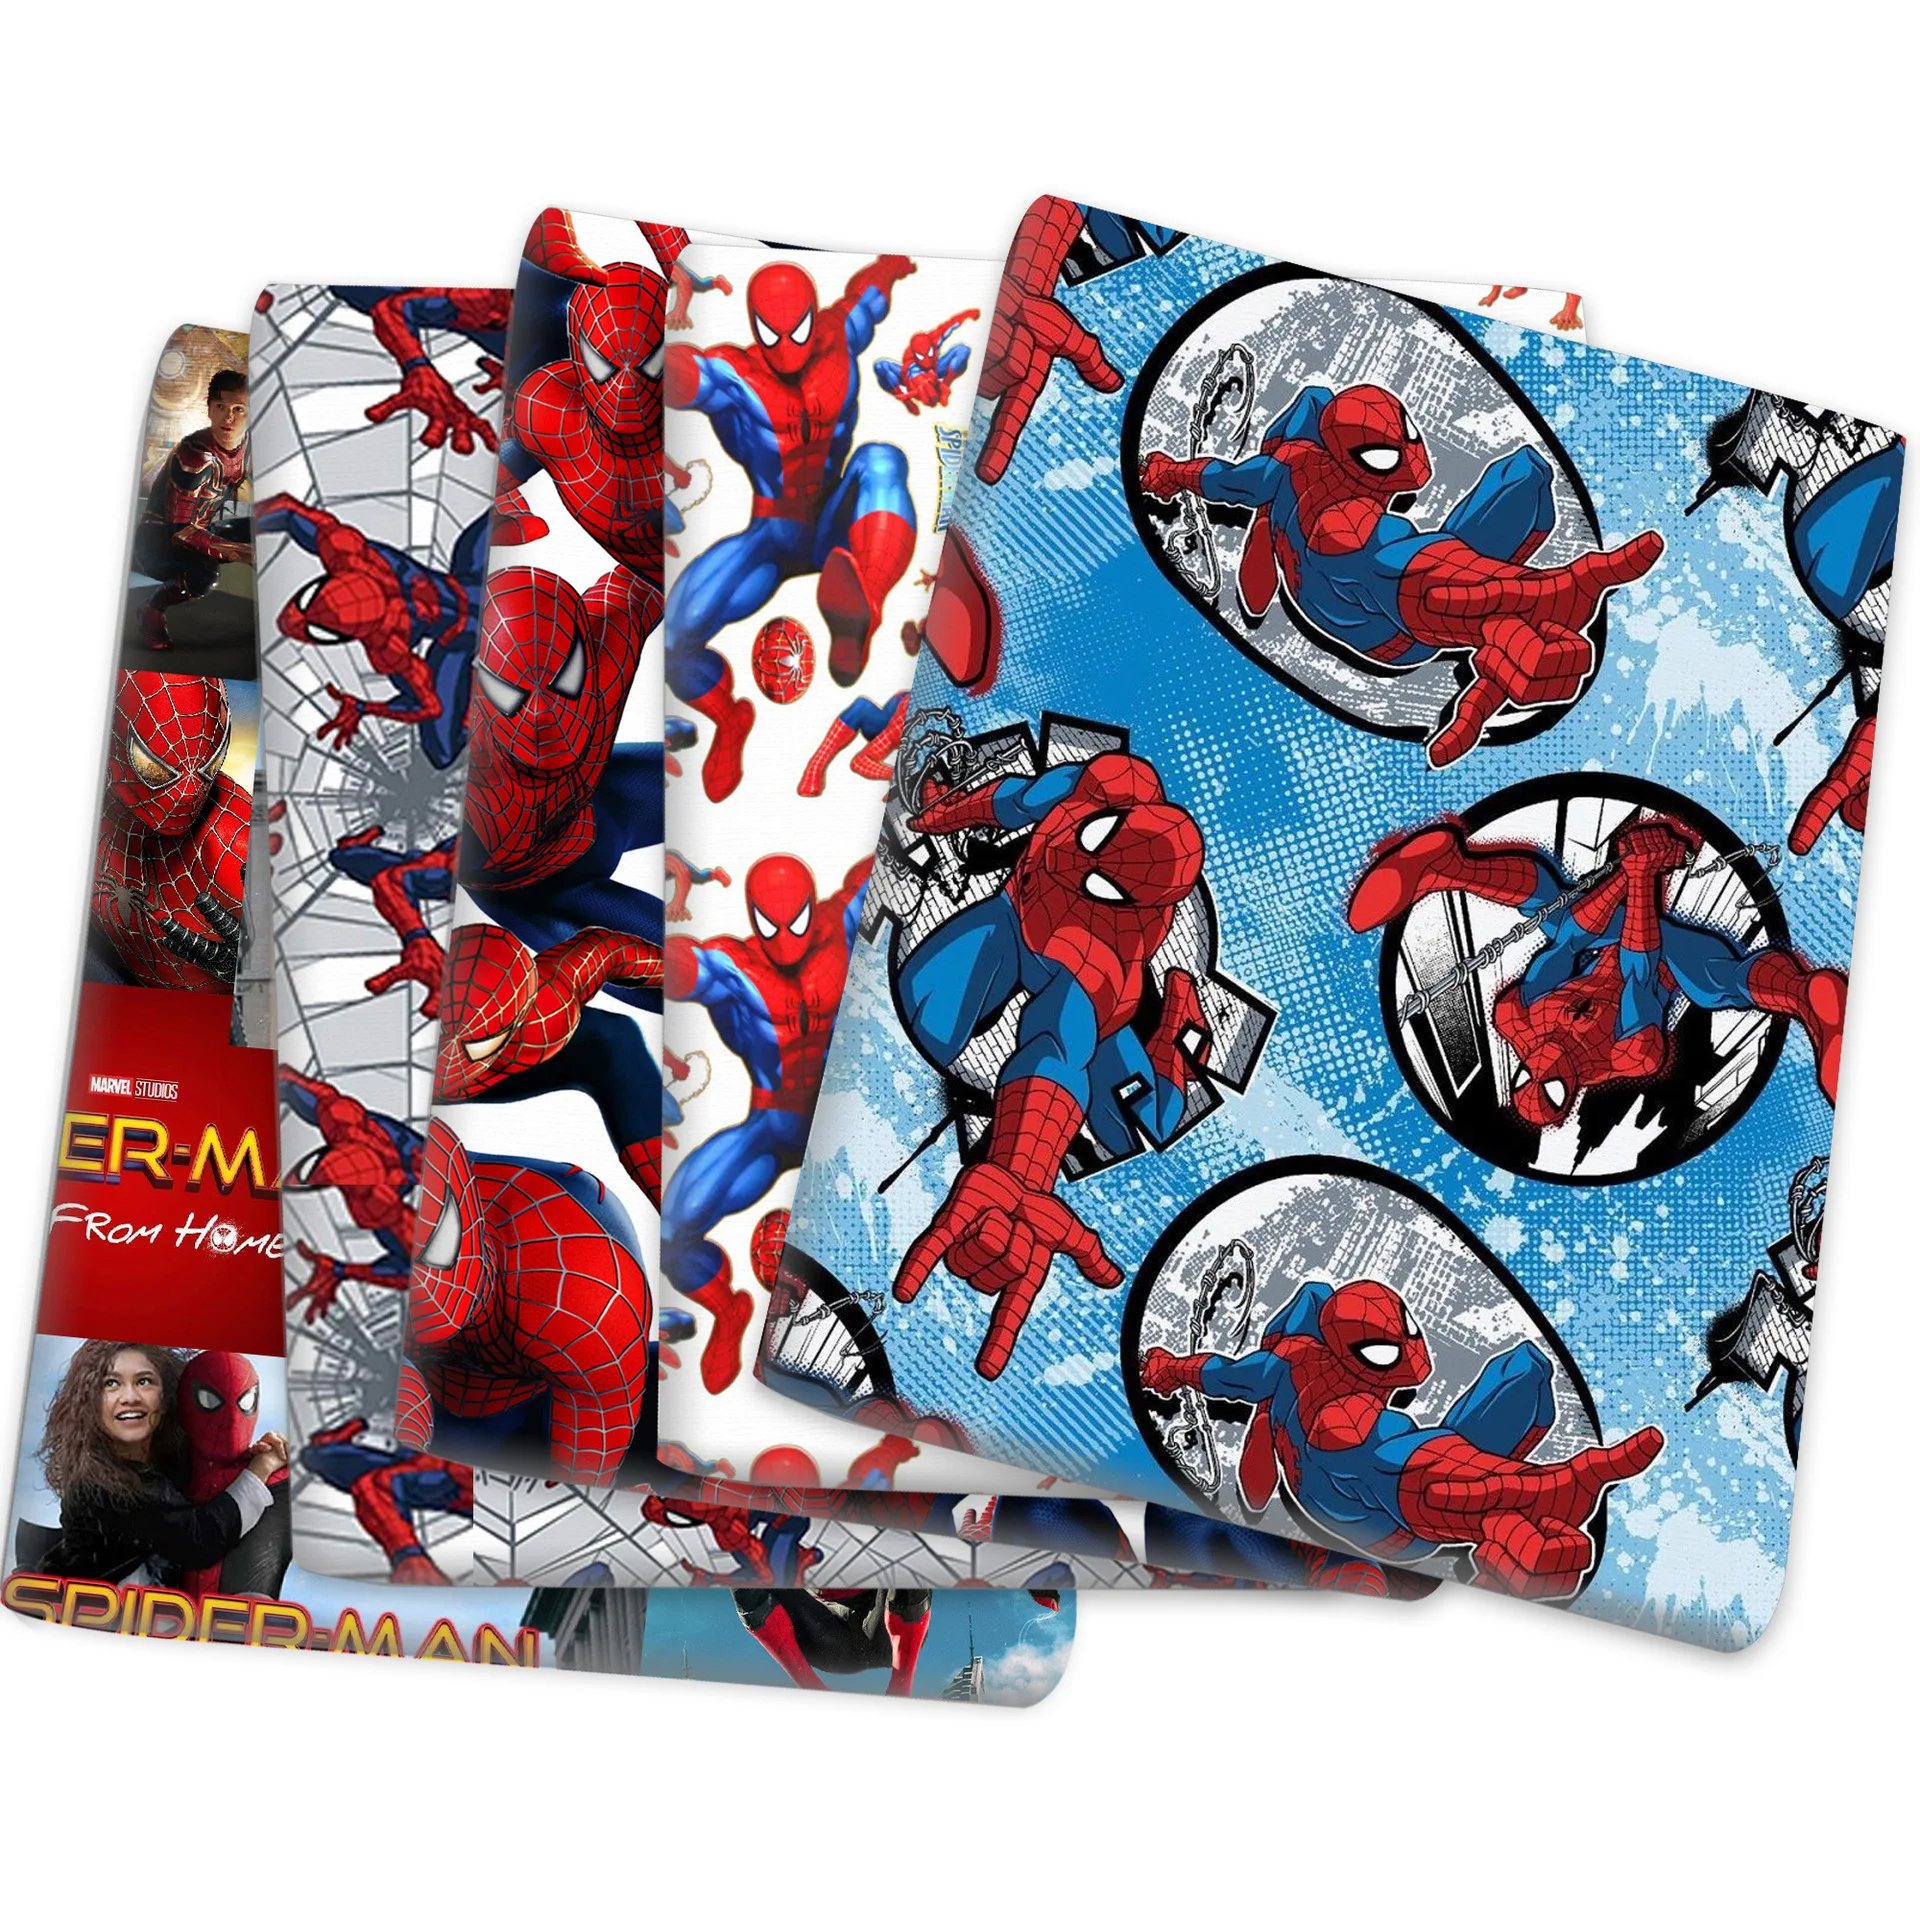 Disney Superhero Spiderman Polyester Cotton Fabric By Meter Sew Children Clothes Patchwork Quilting DIY Needlework Material